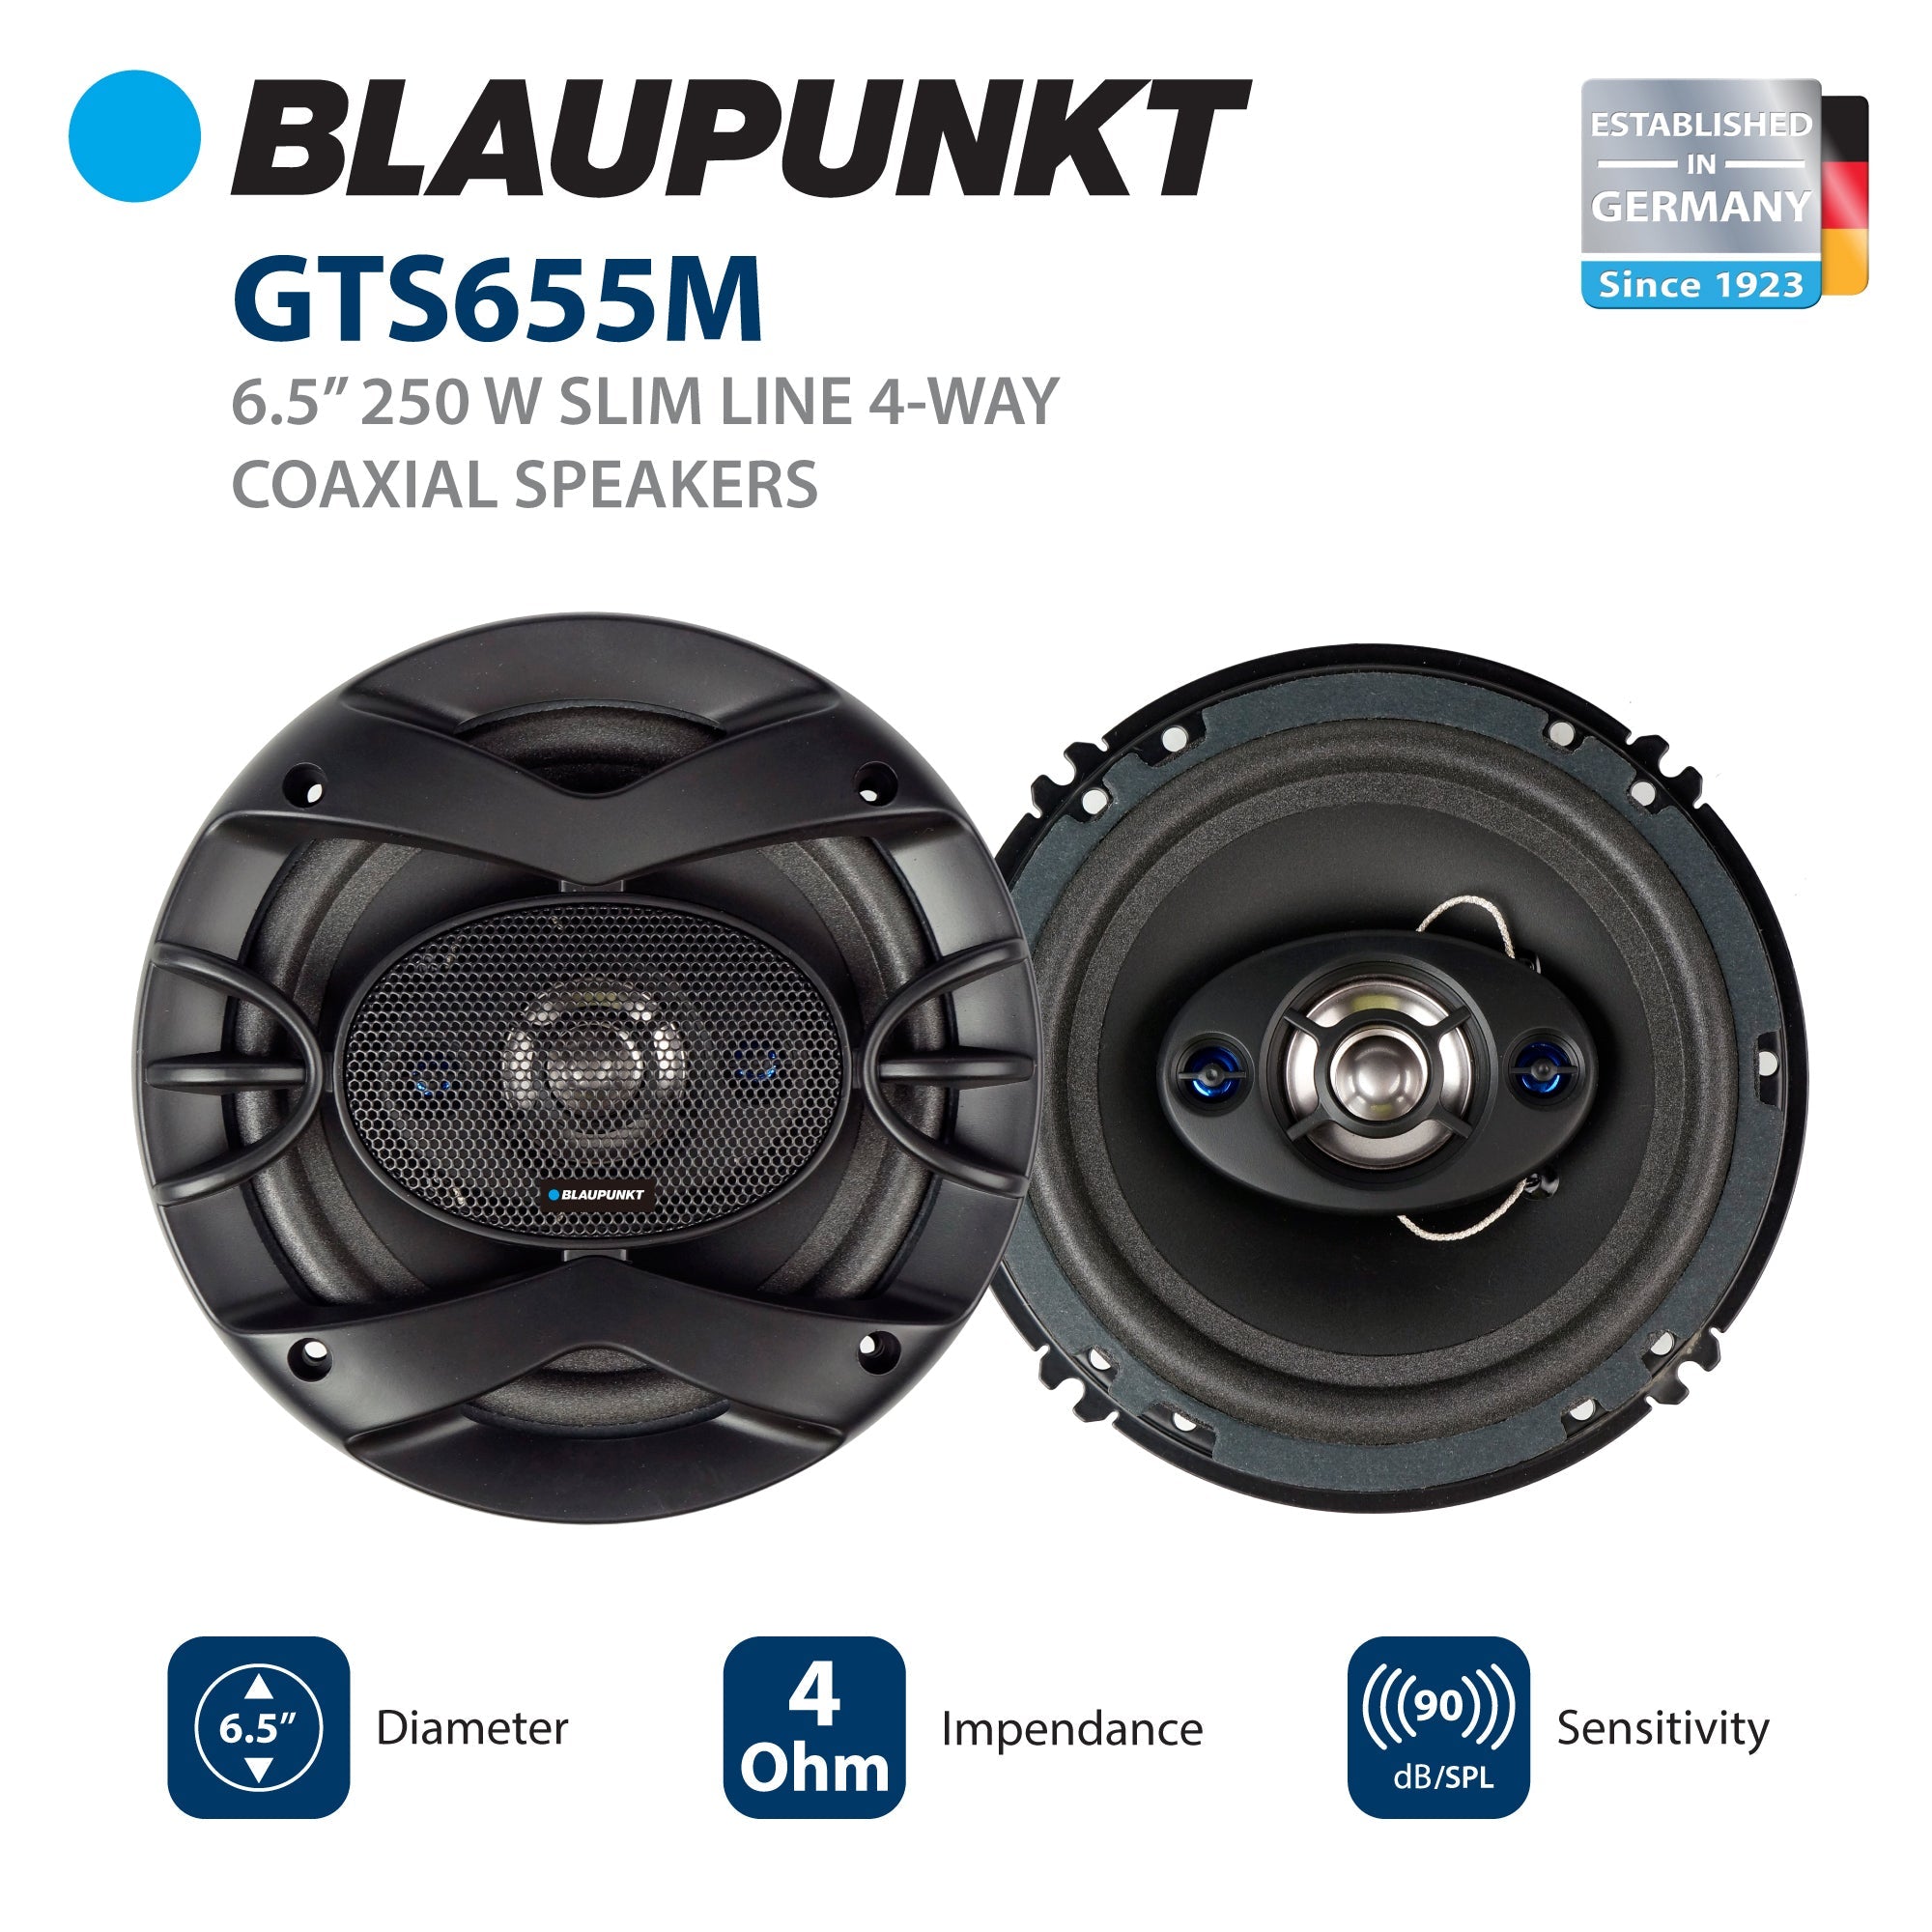 Bocinas 6.5" Blaupunkt GTS655M | The Outlet Station